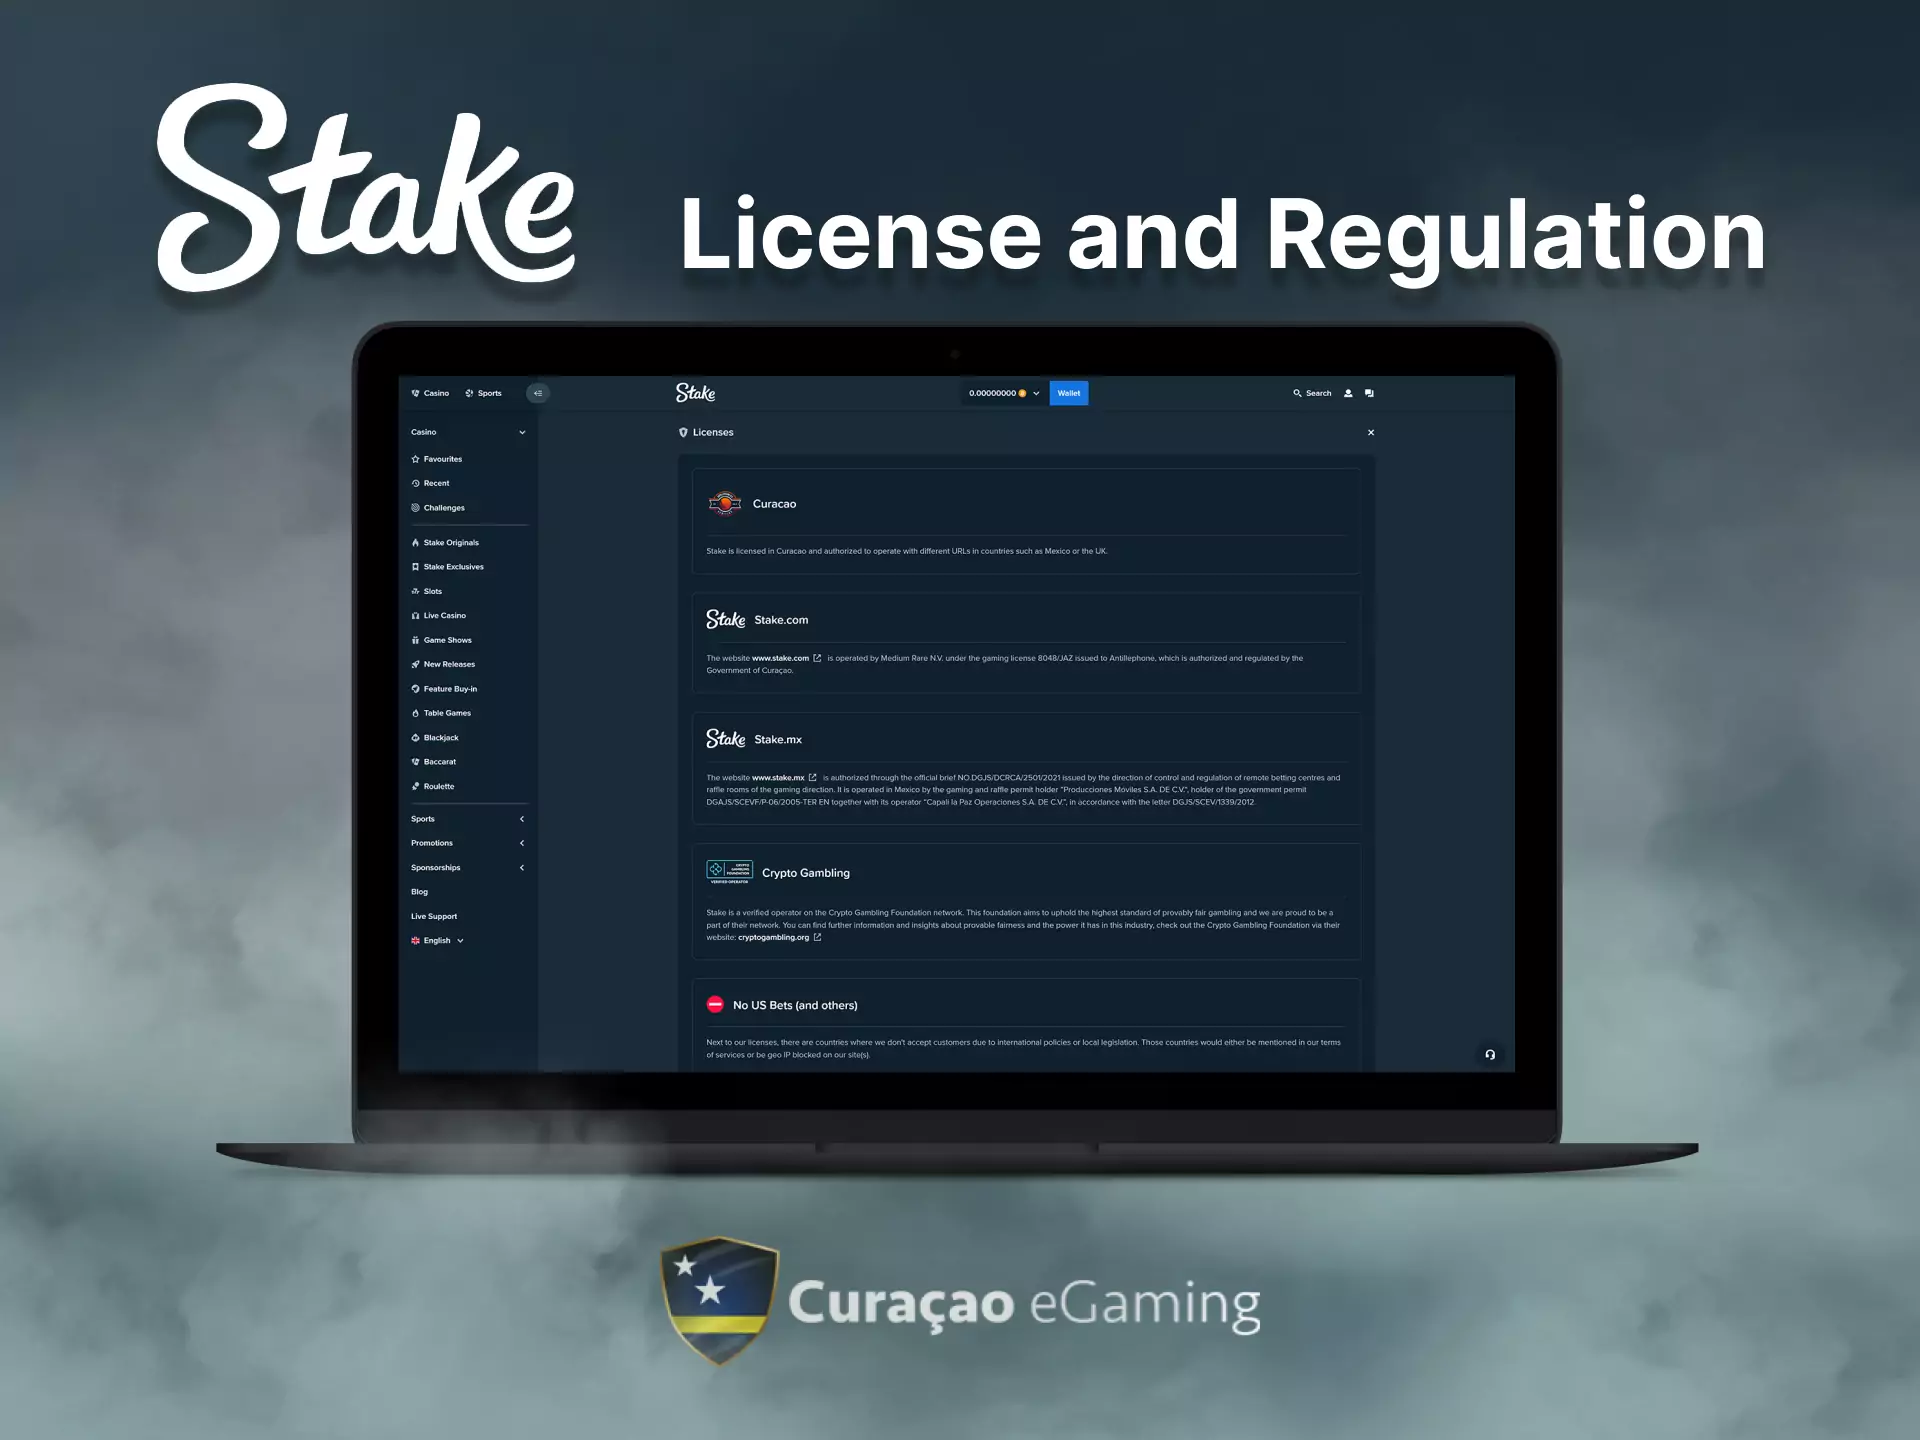 In India, Stake works legally thanking the Curacao Egaming license.